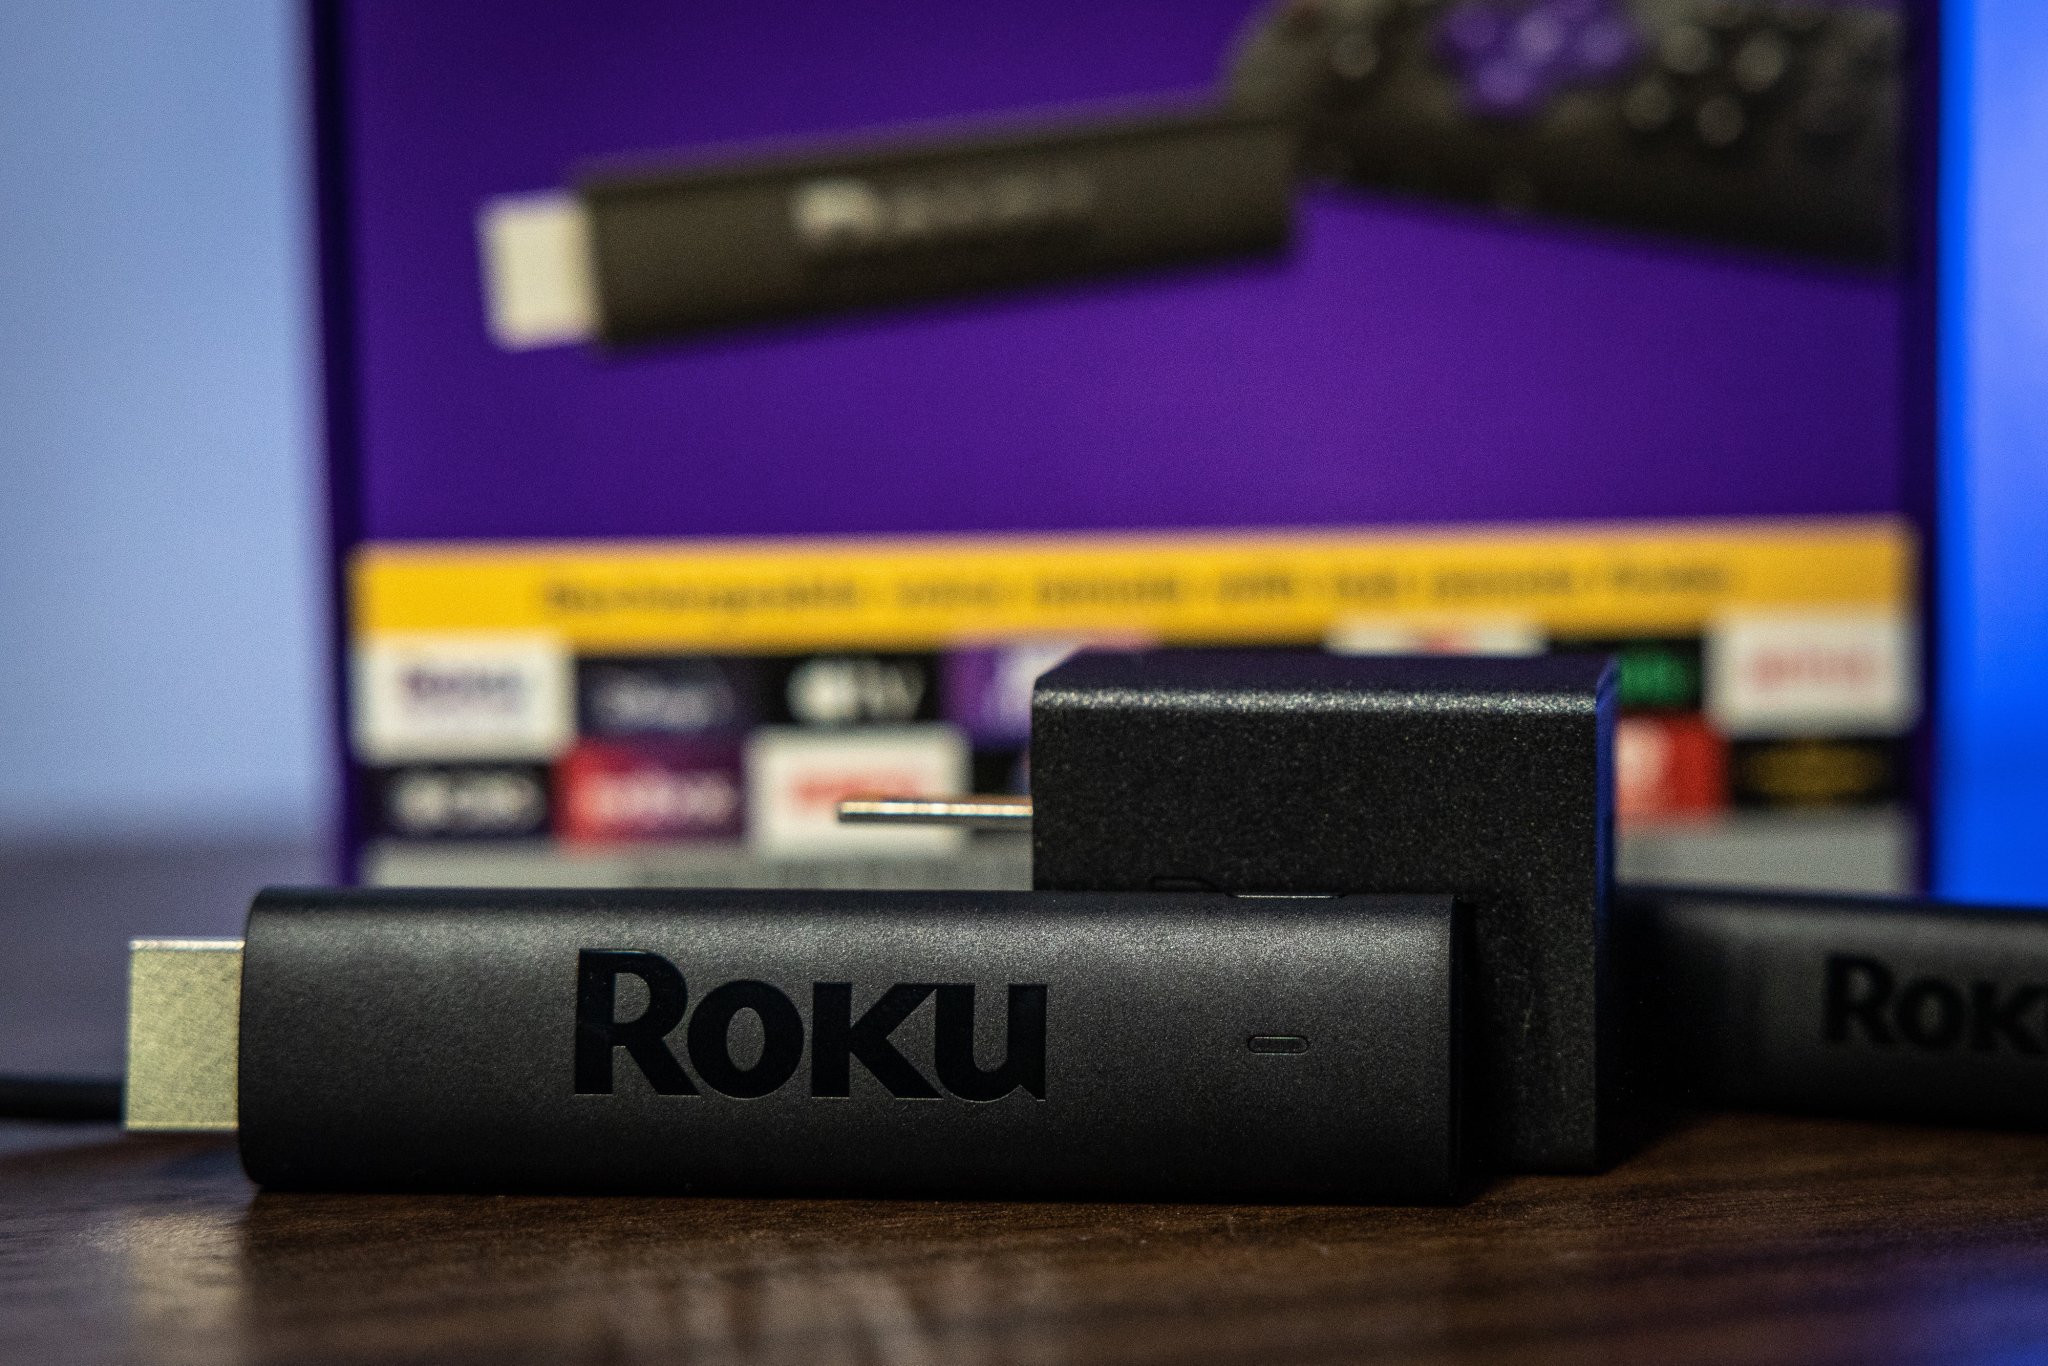 How to watch Super Bowl 2022 on Roku